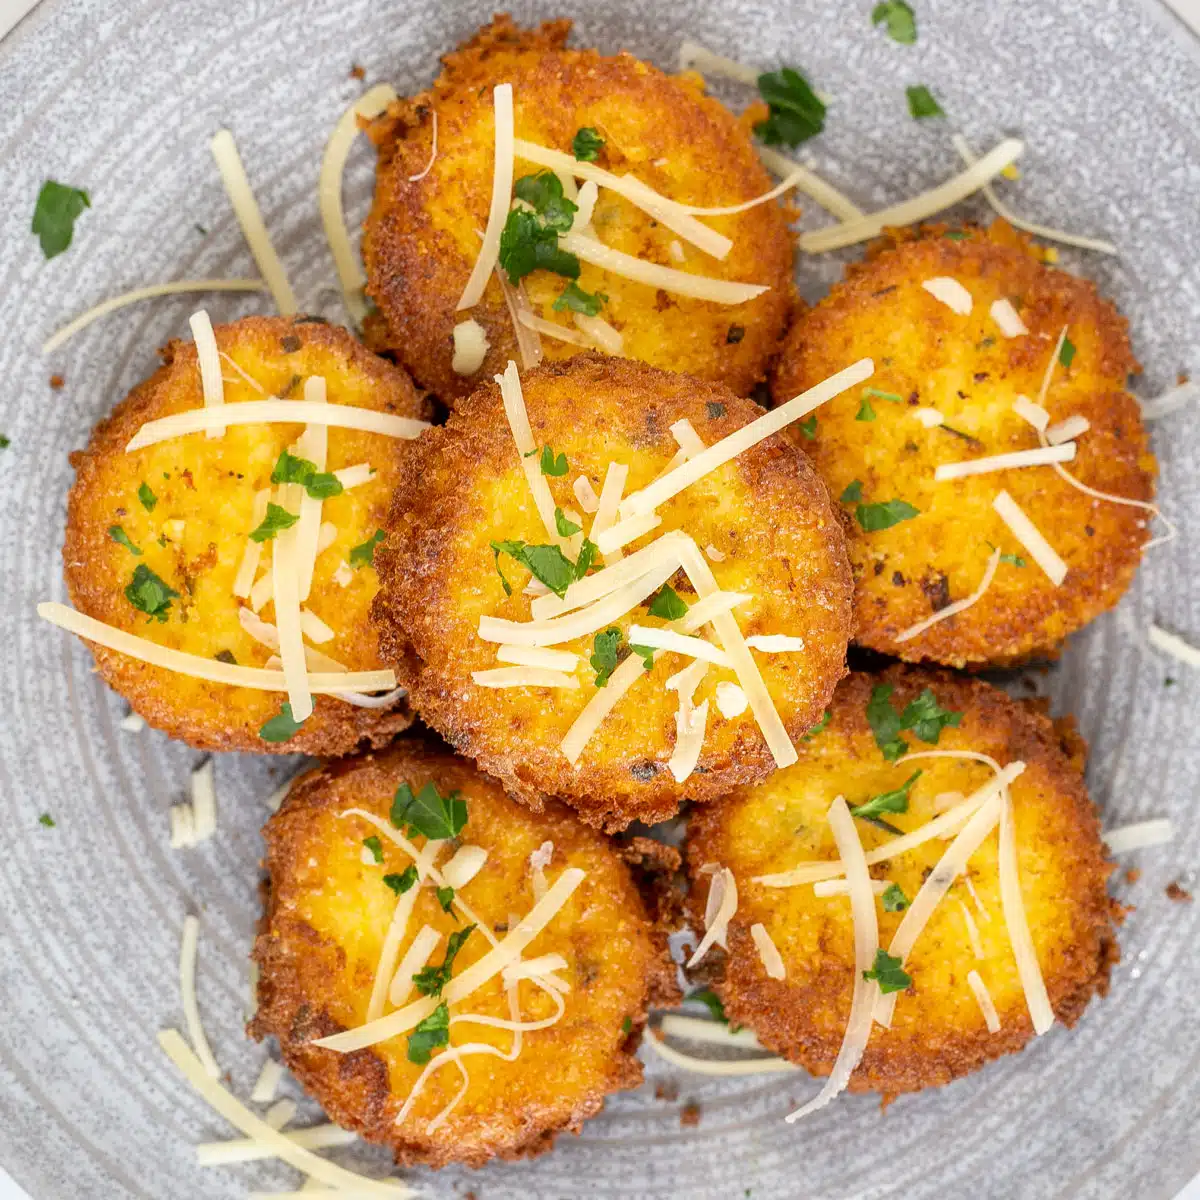 Best polenta cakes served on grey plate with grated parmesan cheese and fresh herbs.